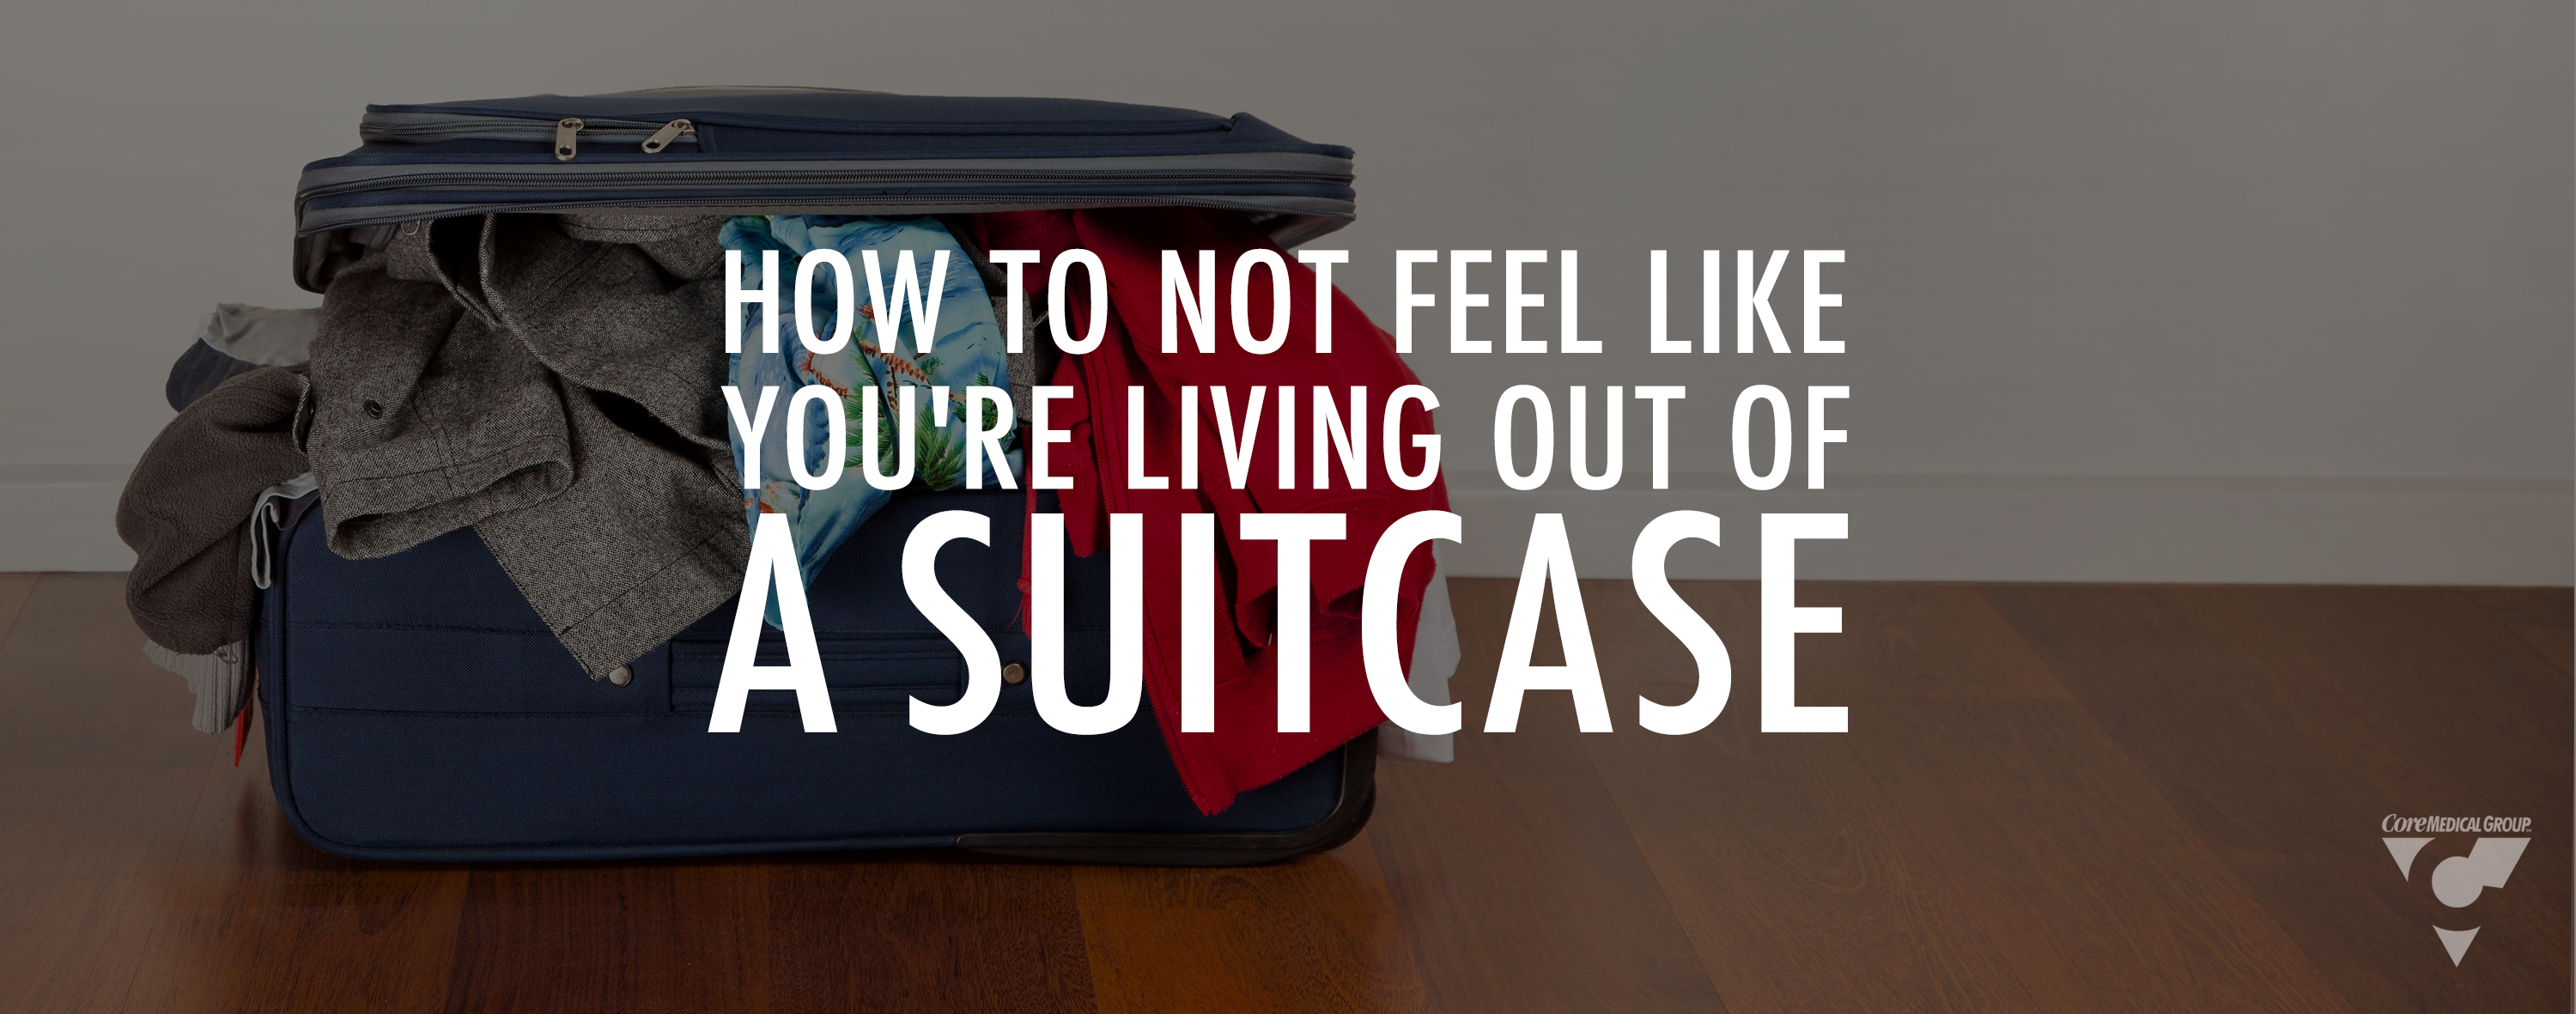 How to Not Feel Like You're Living Out of a Suitcase